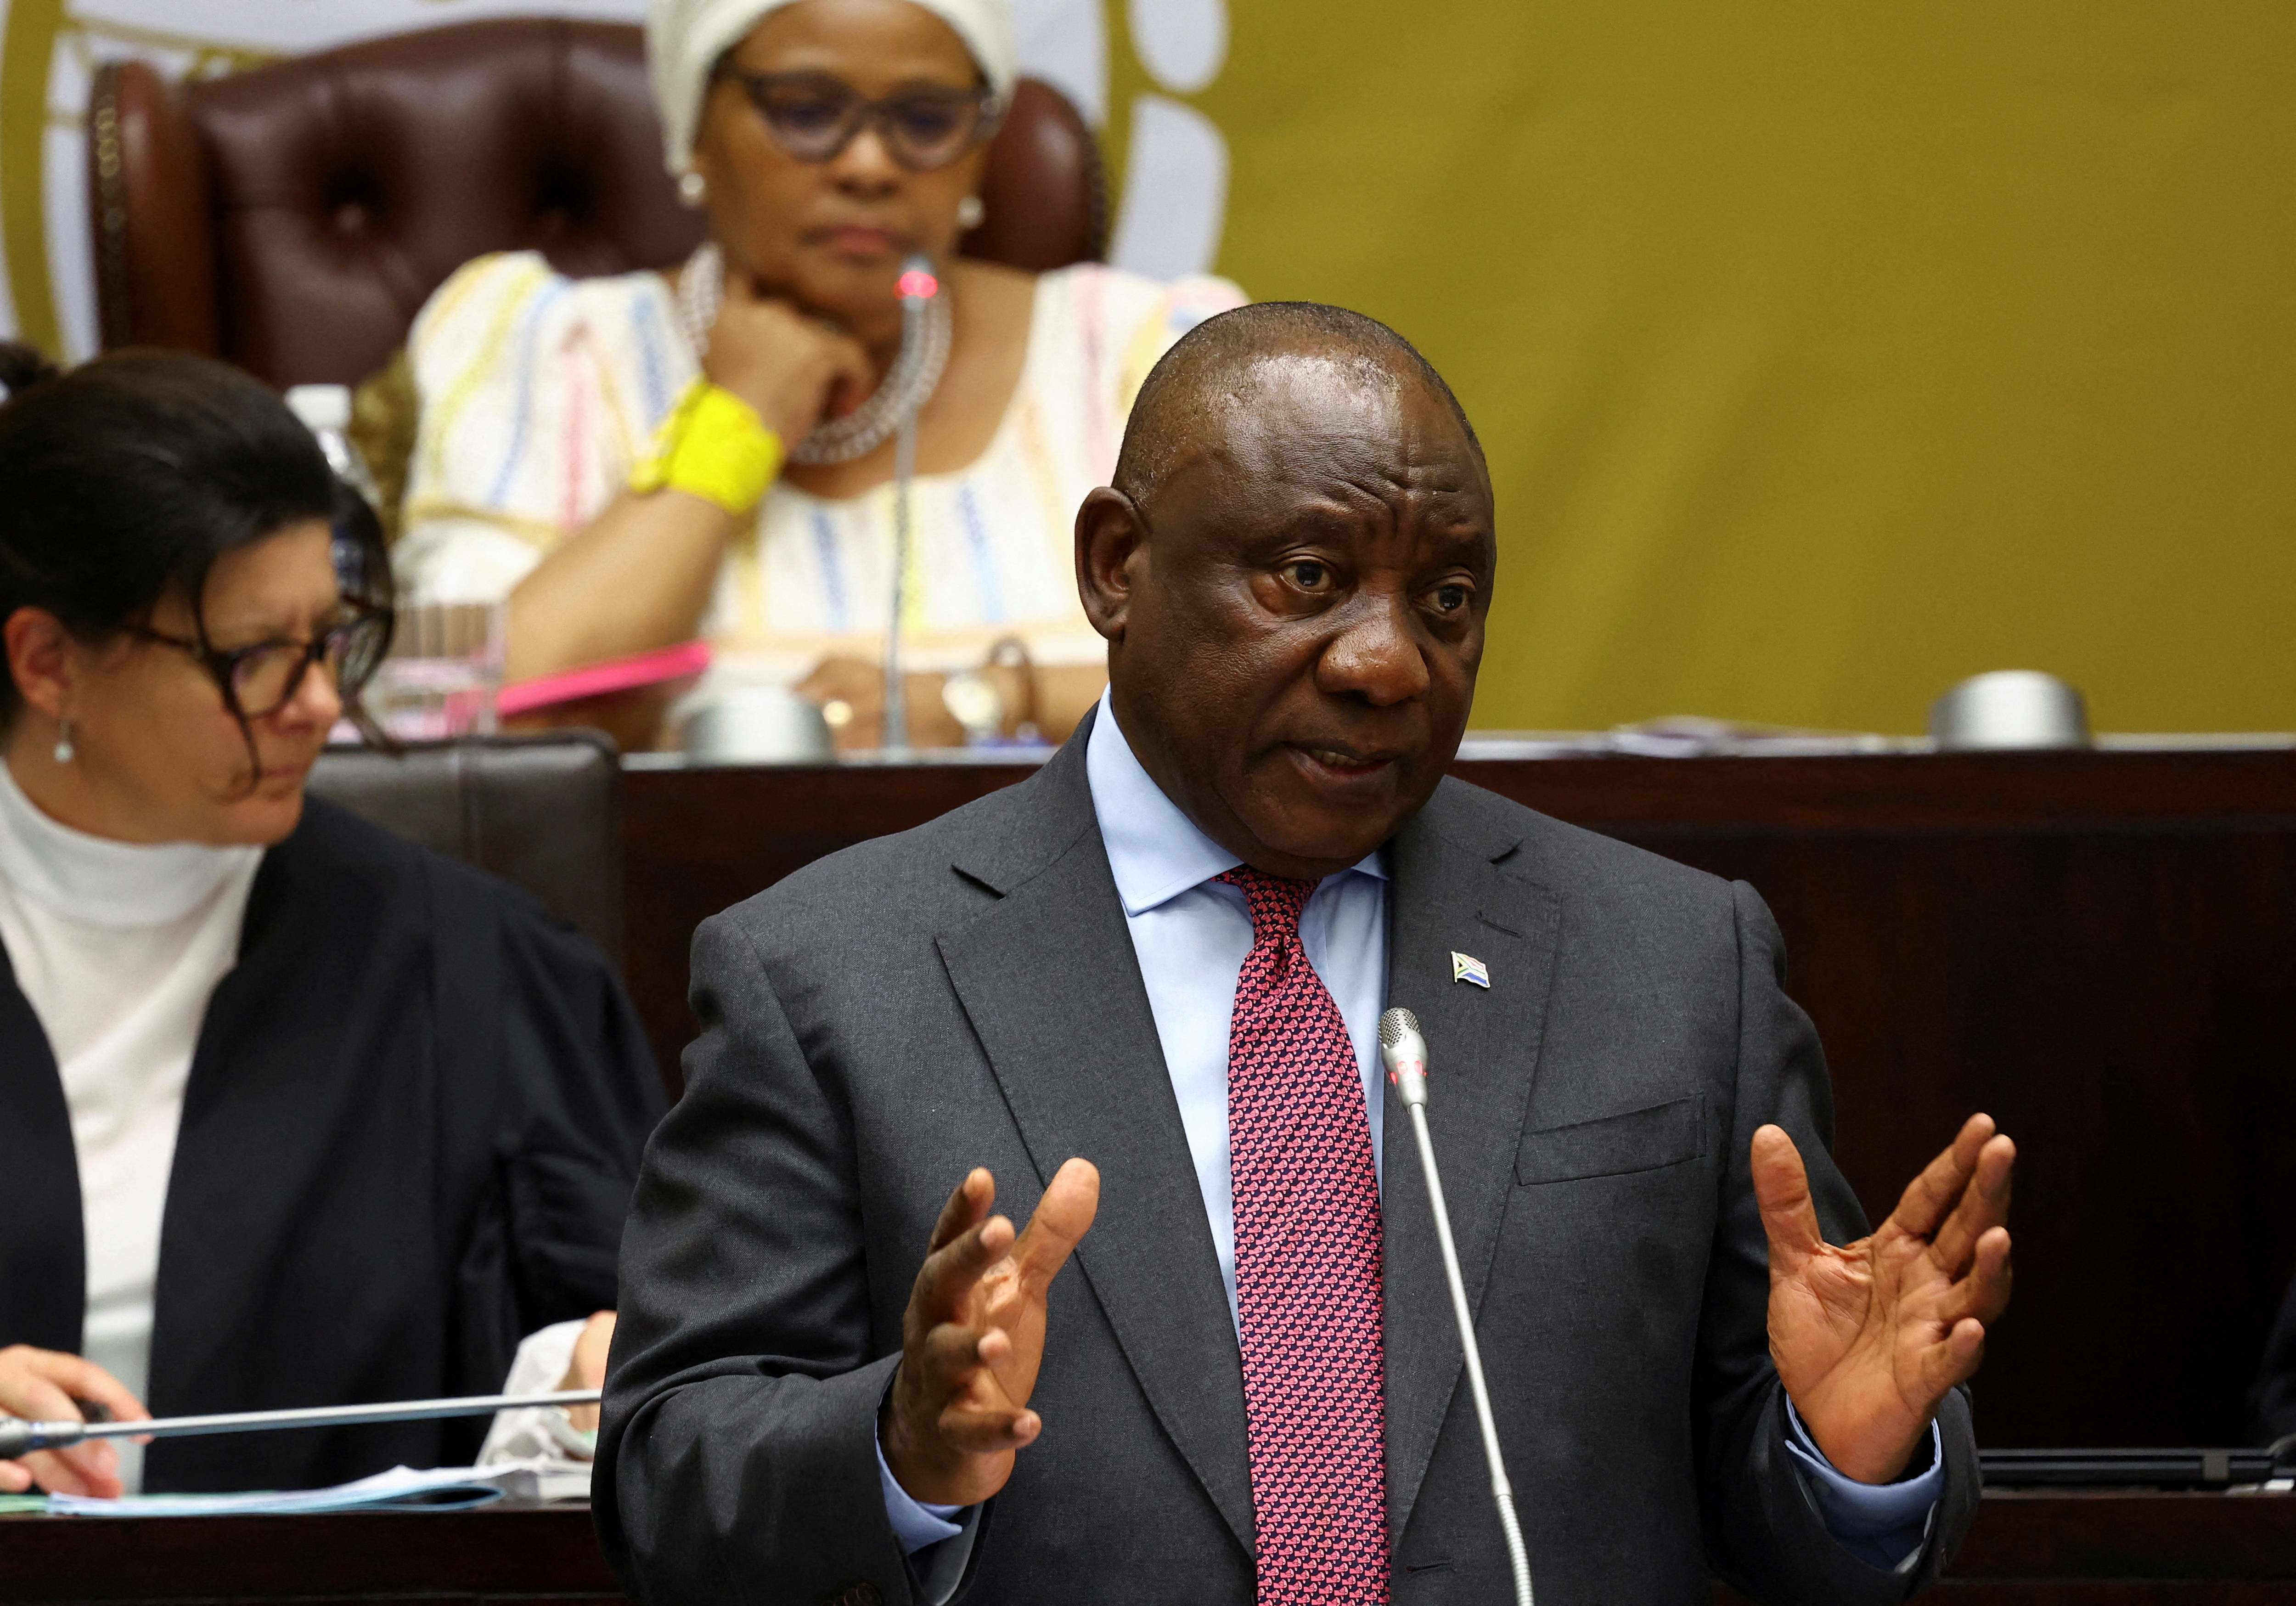 South African President Cyril Ramaphosa in parliament in Cape Town